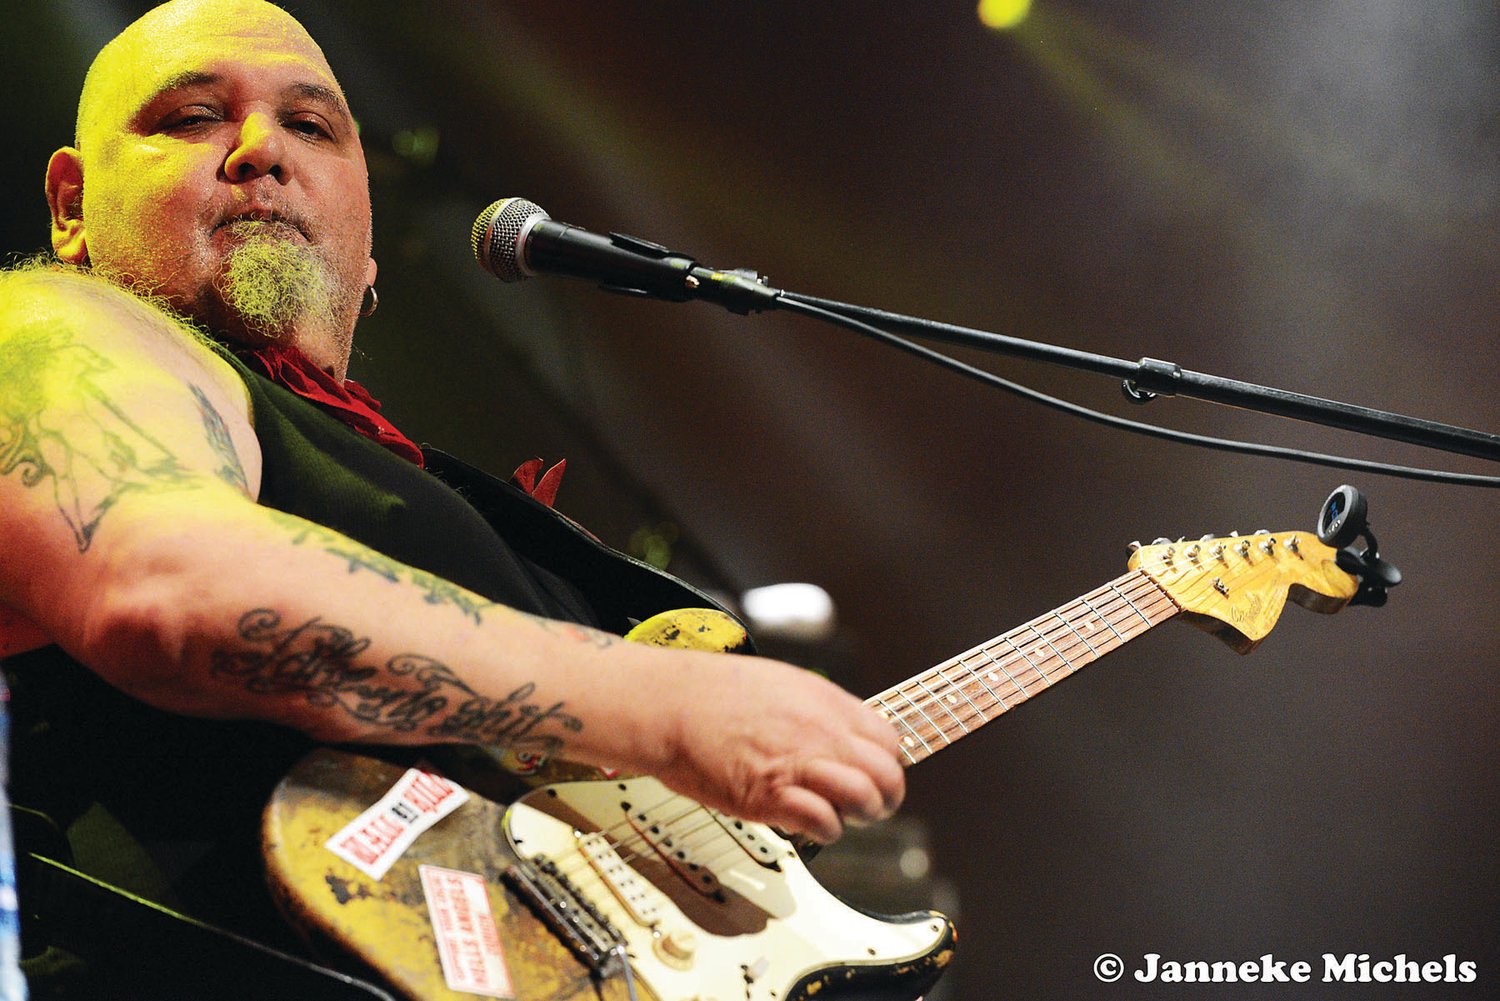 Popa Chubby will perform at Sellersville Theater. Photograph by Janneke Michels.